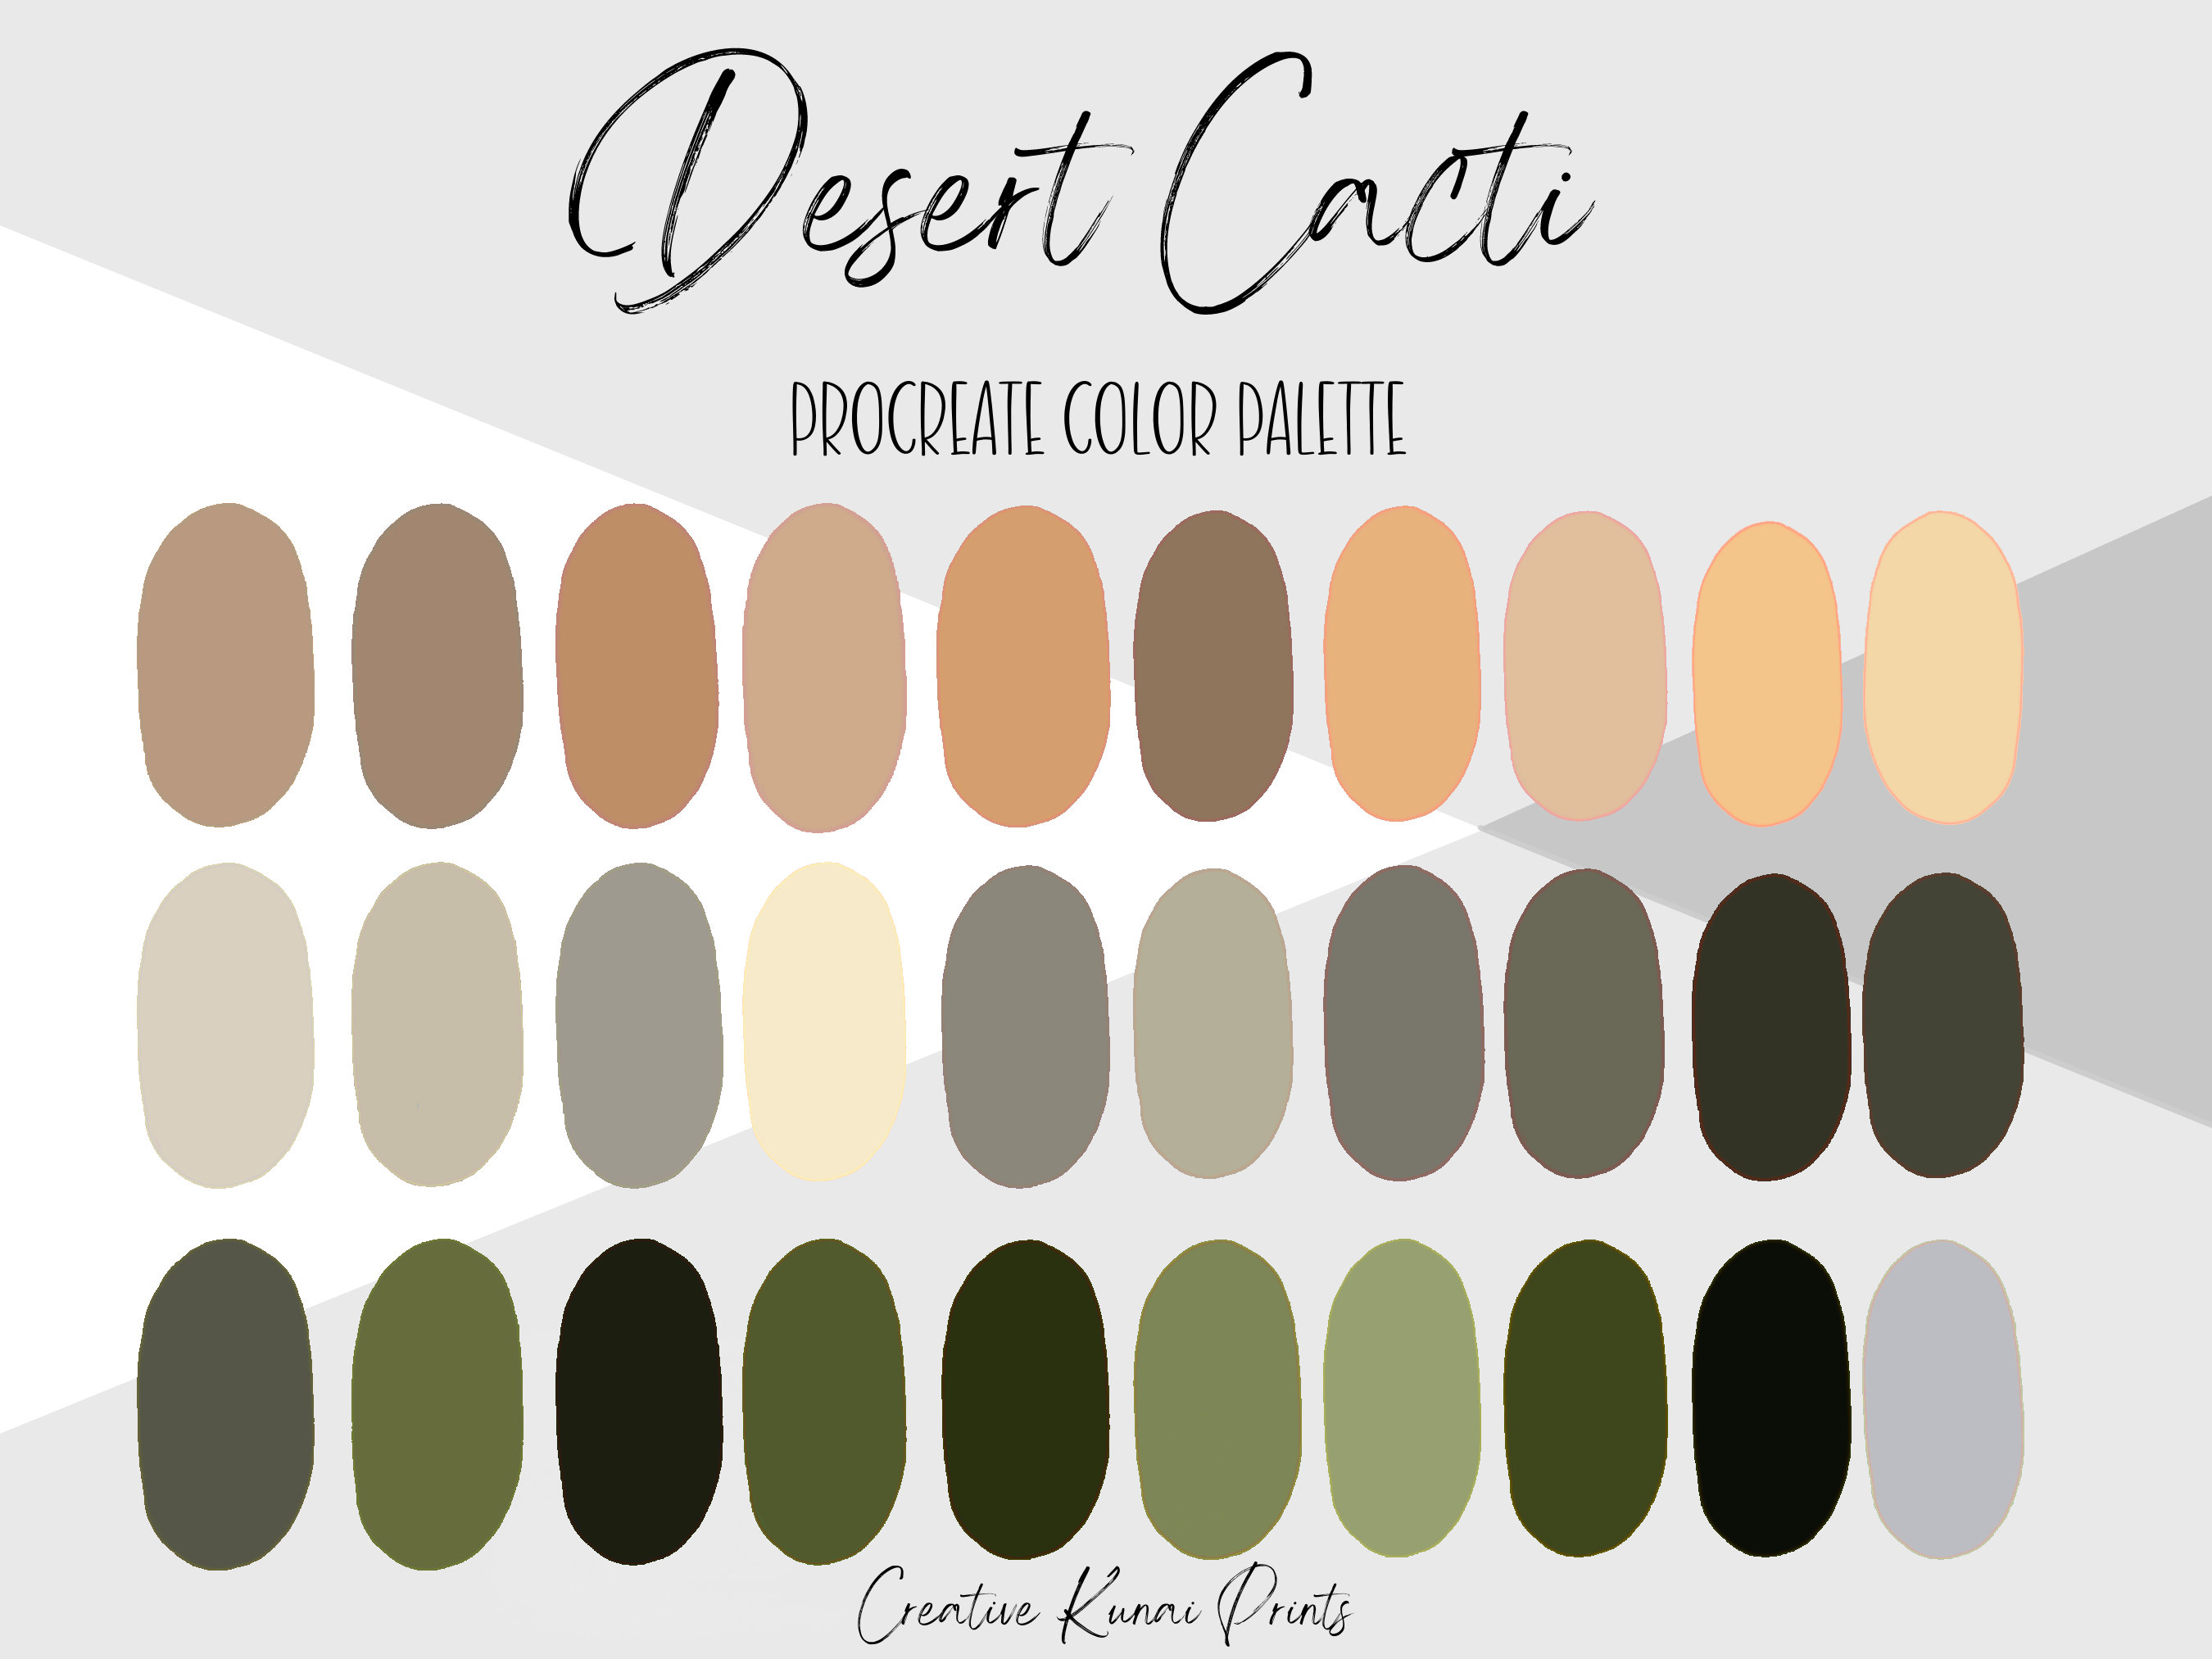 Essential Colors Inspired by the Desert